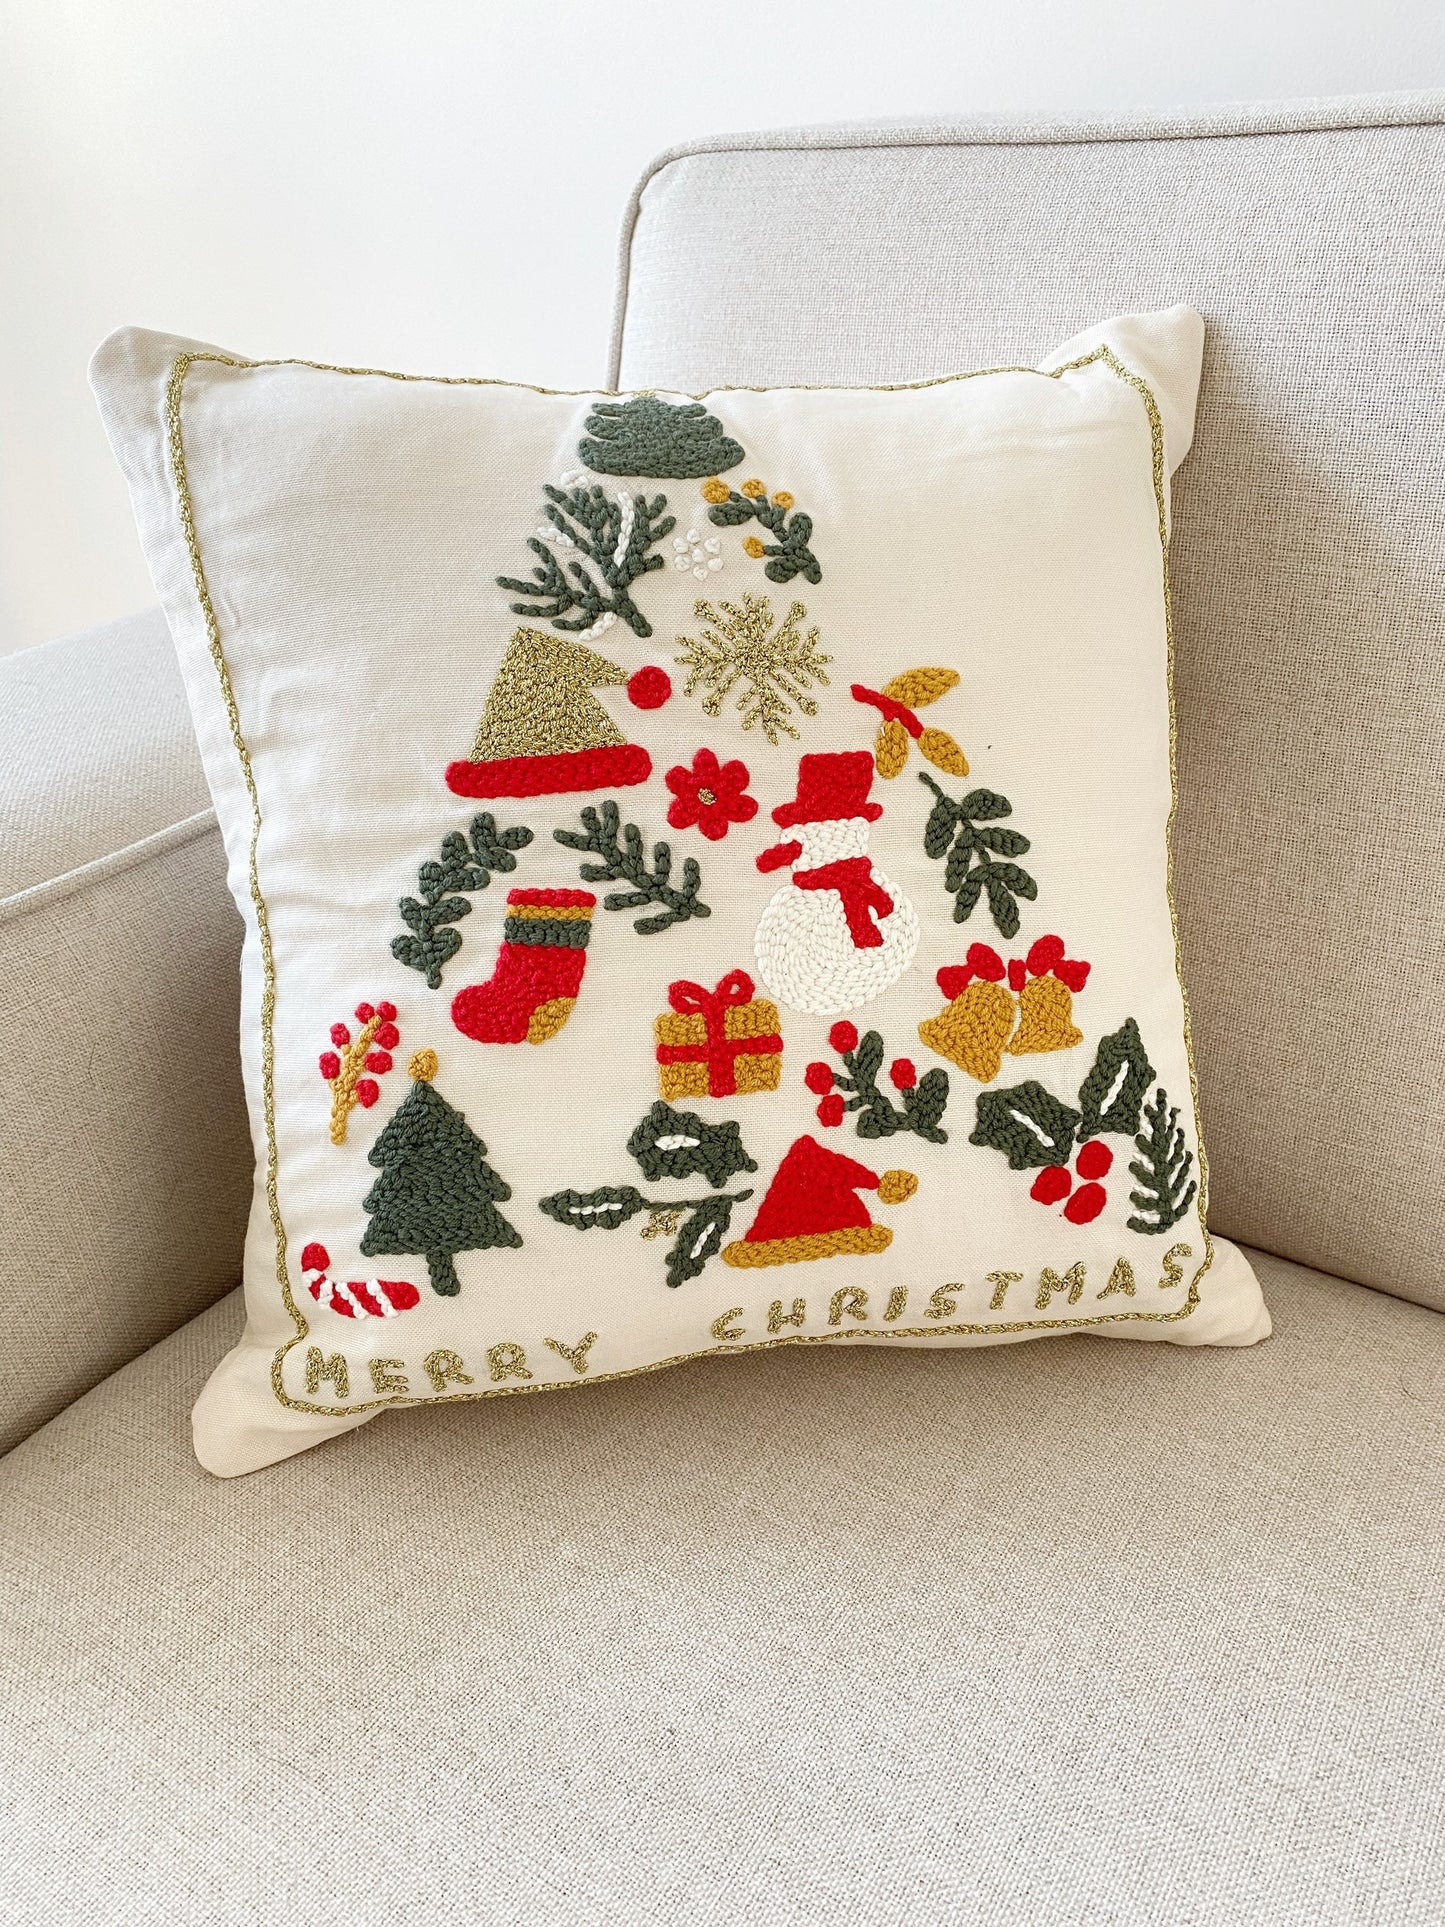 Hand Tufted MERRY CHRISTMAS Pillow Cover Set